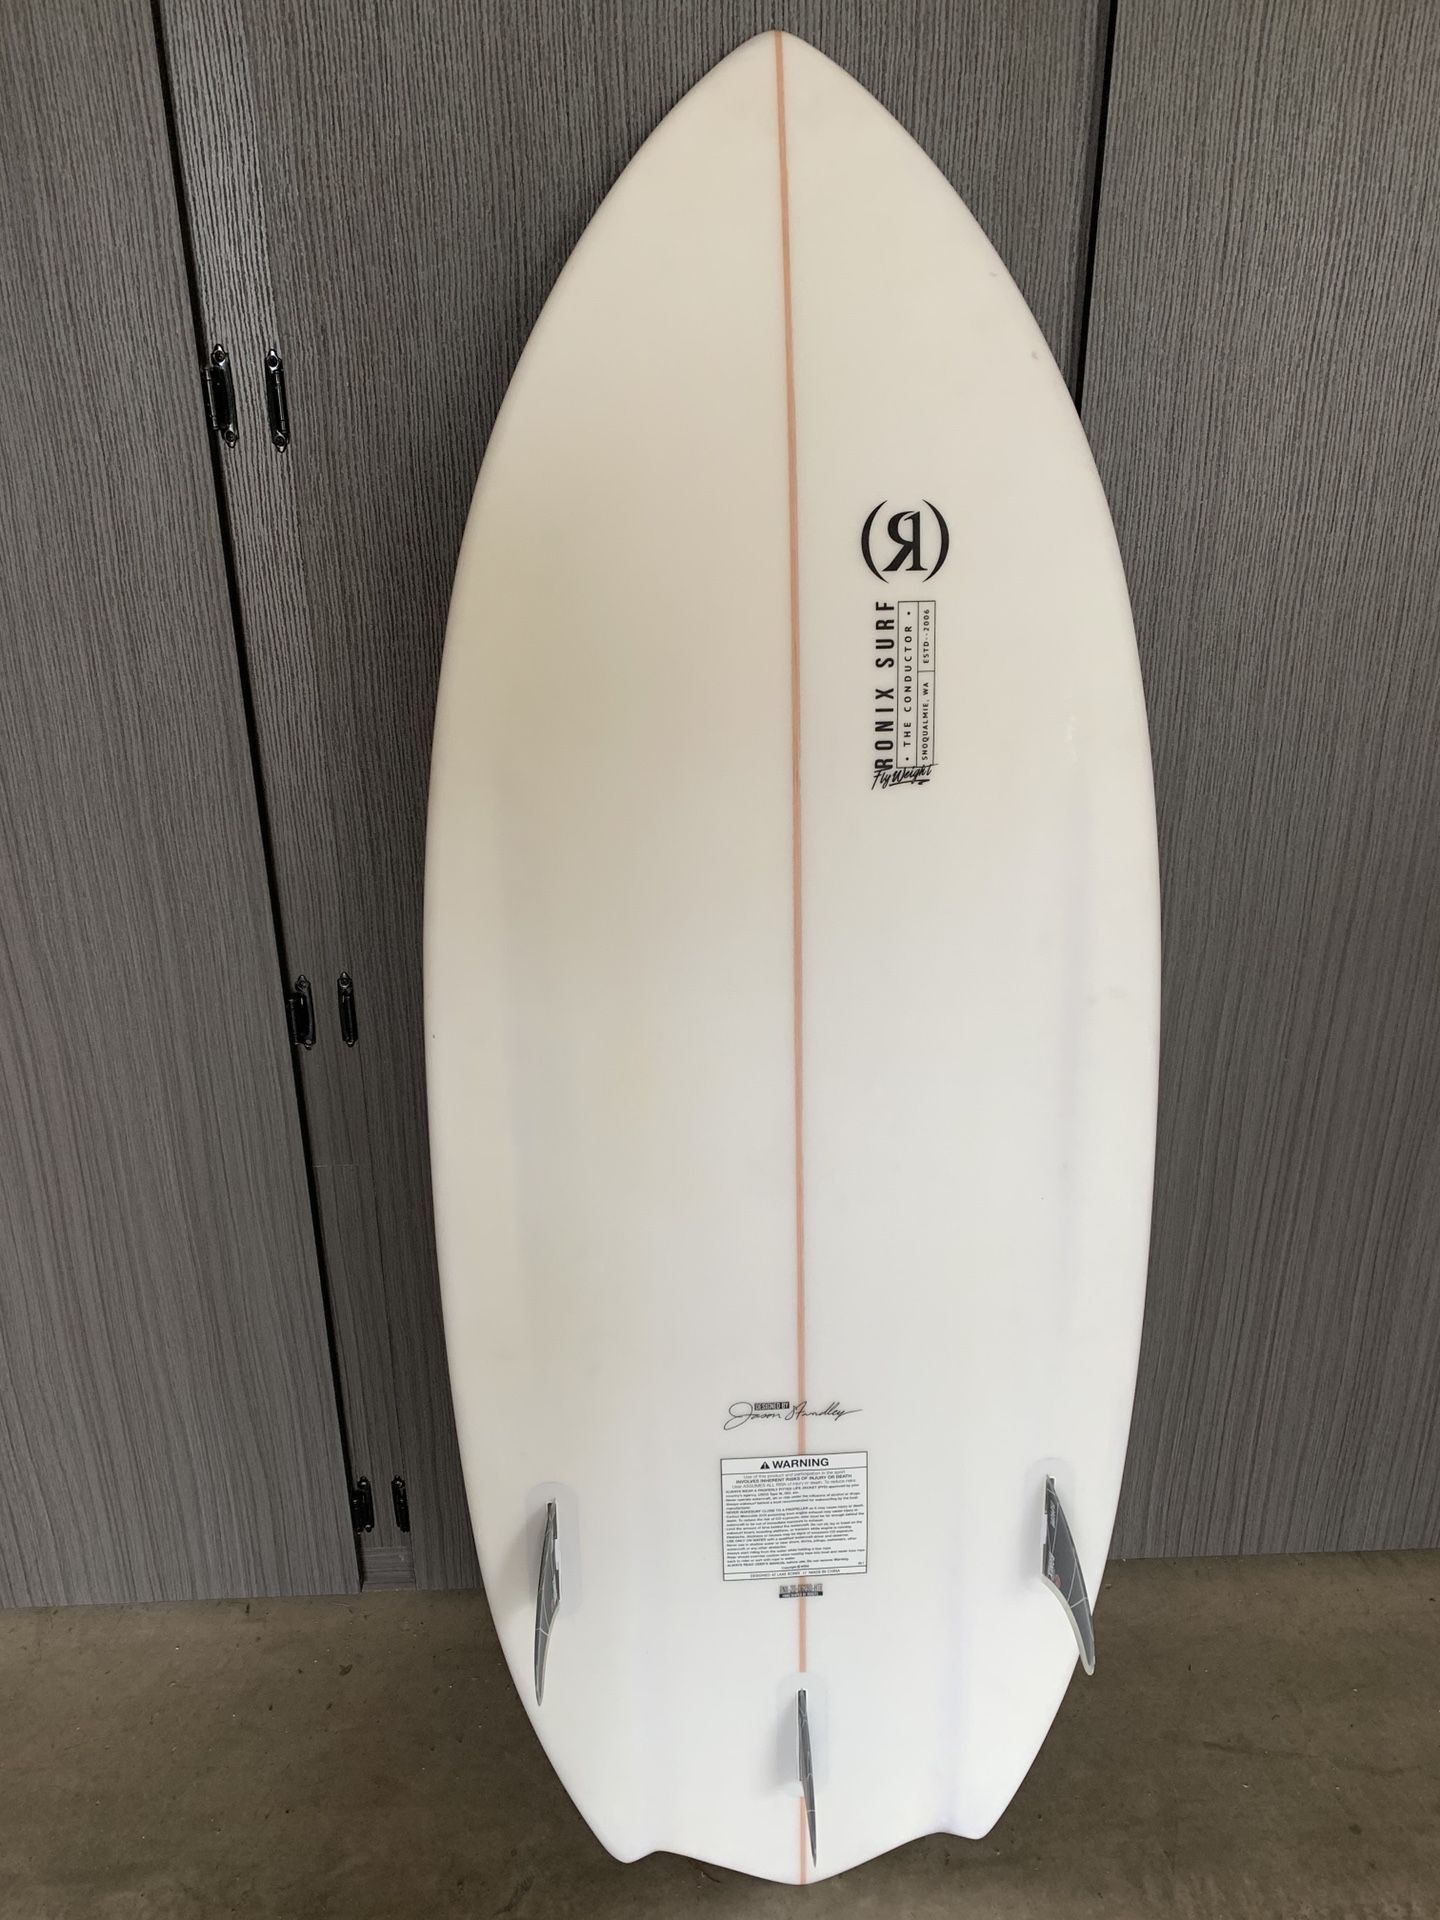 Ronix "the conductor" wake surfboard